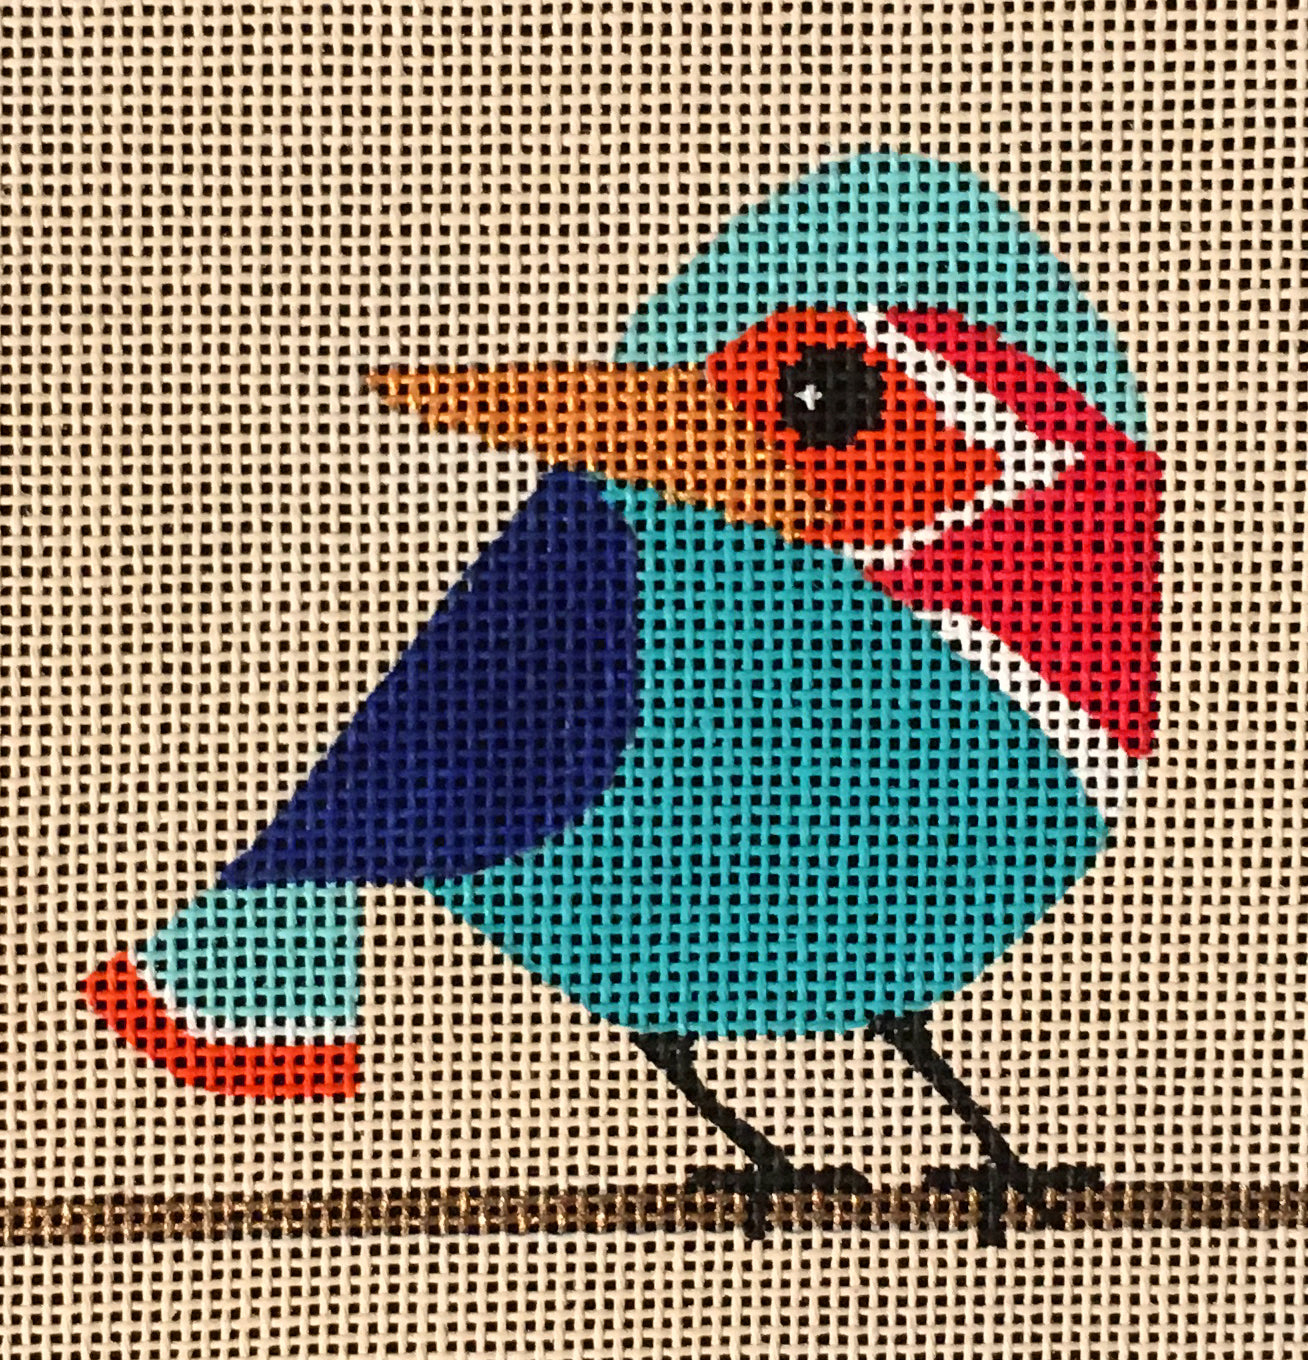 Amanda Lawford bright mod bird needlepoint canvas from Vallerie Needlepoint Gallery sized as a 4 x 4 insert or a coaster